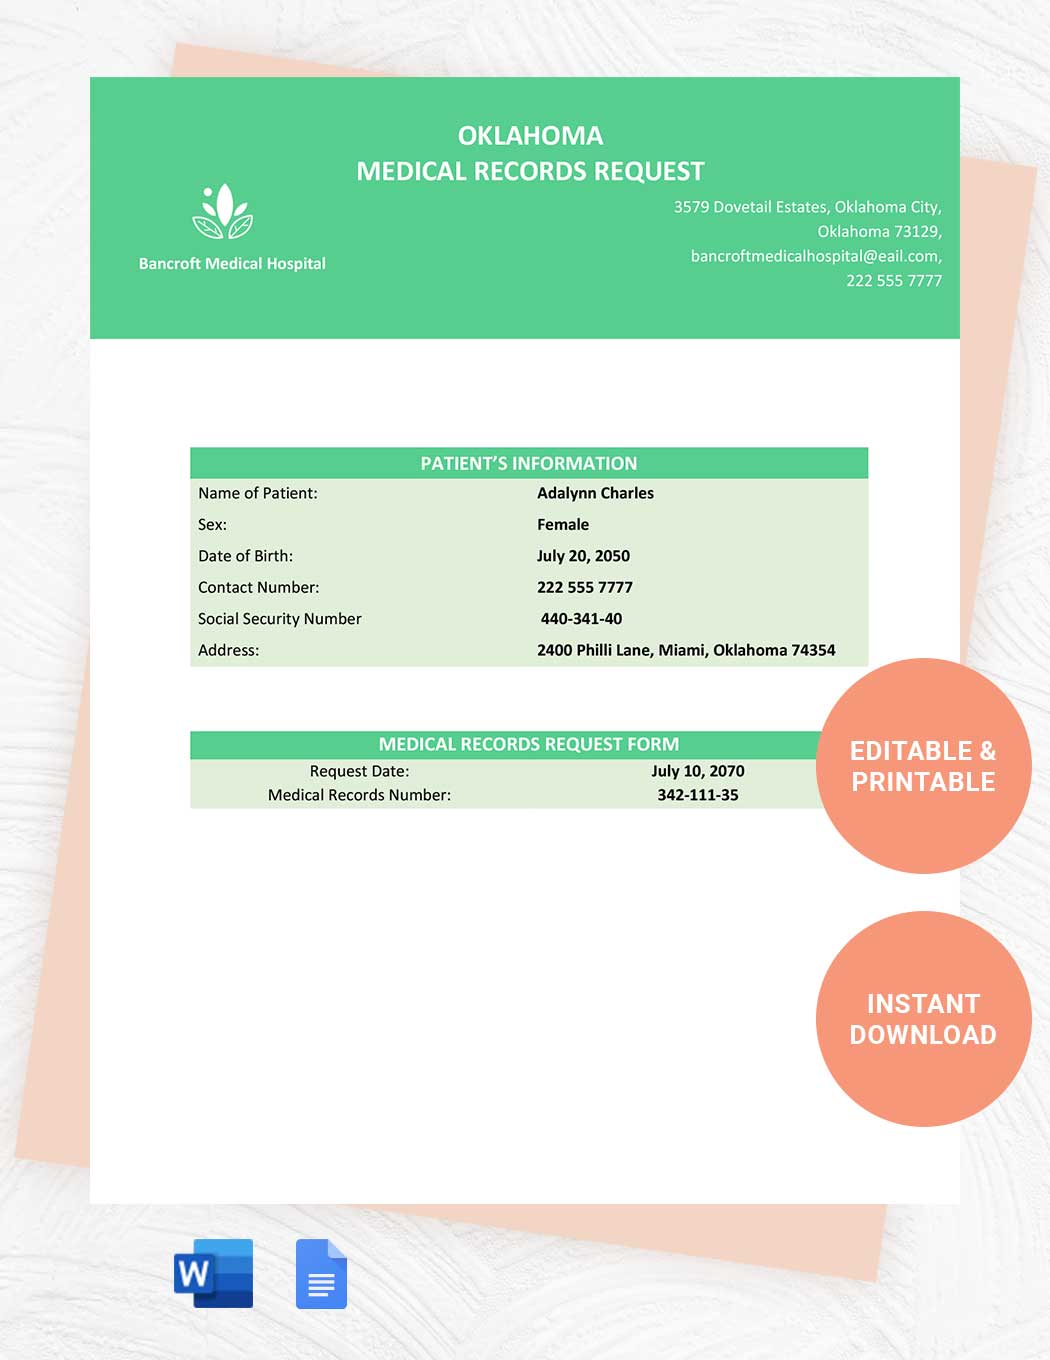 Oklahoma Medical Records Request Template in Word, Google Docs